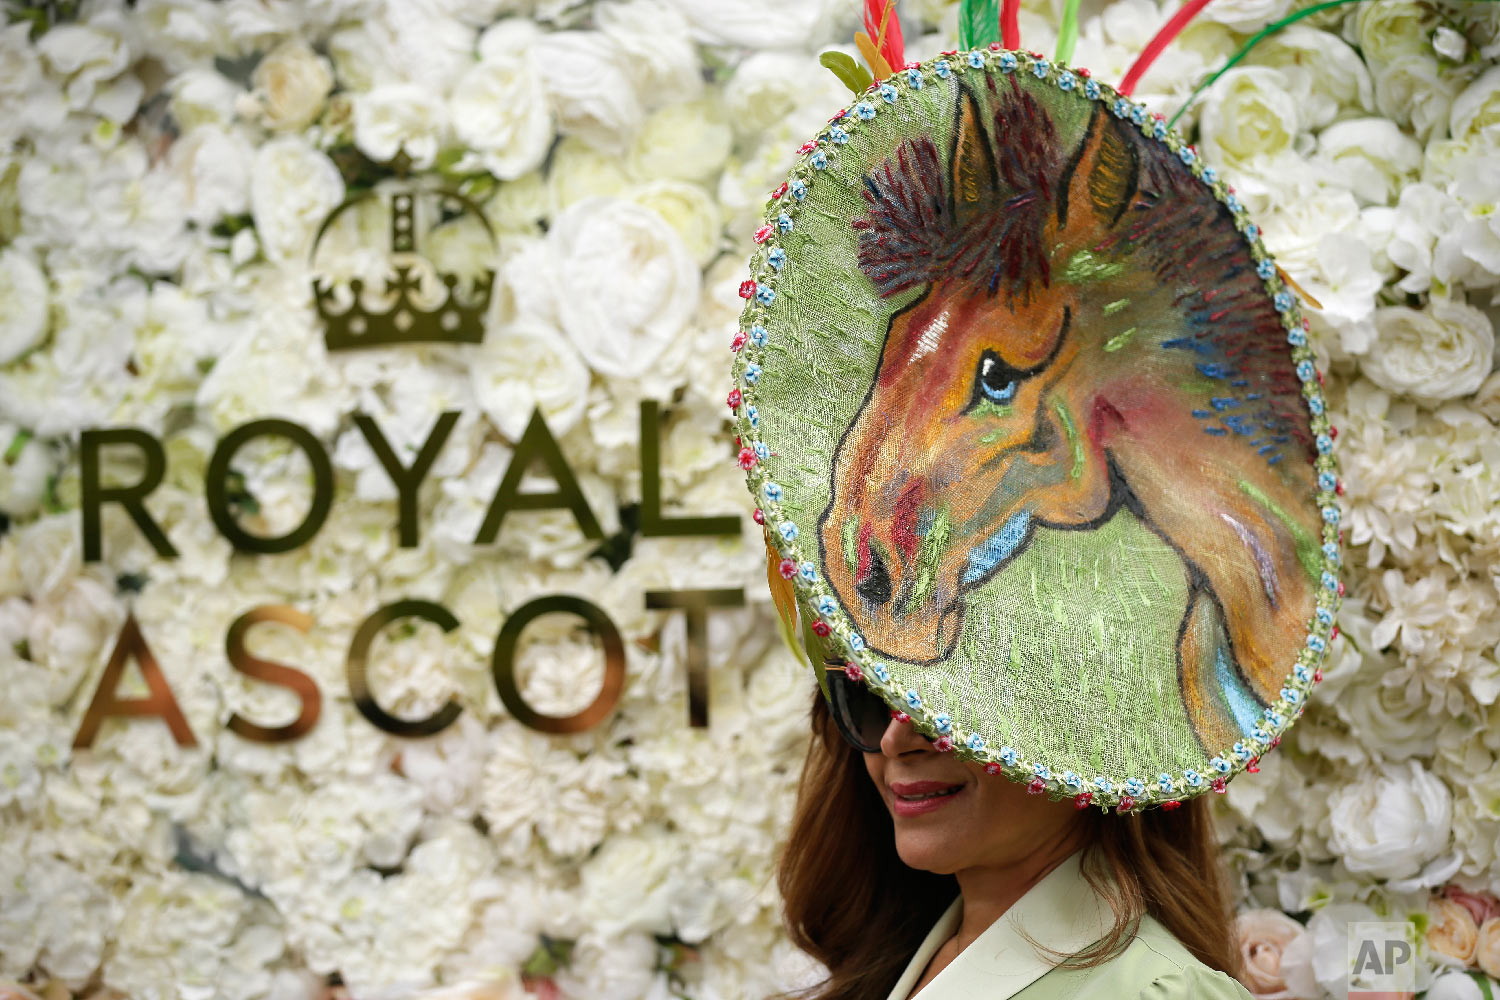  A racegoer poses for photographers on the first day of the Royal Ascot horse race meeting in Ascot, England, Tuesday, June 19, 2018. (AP Photo/Tim Ireland) 